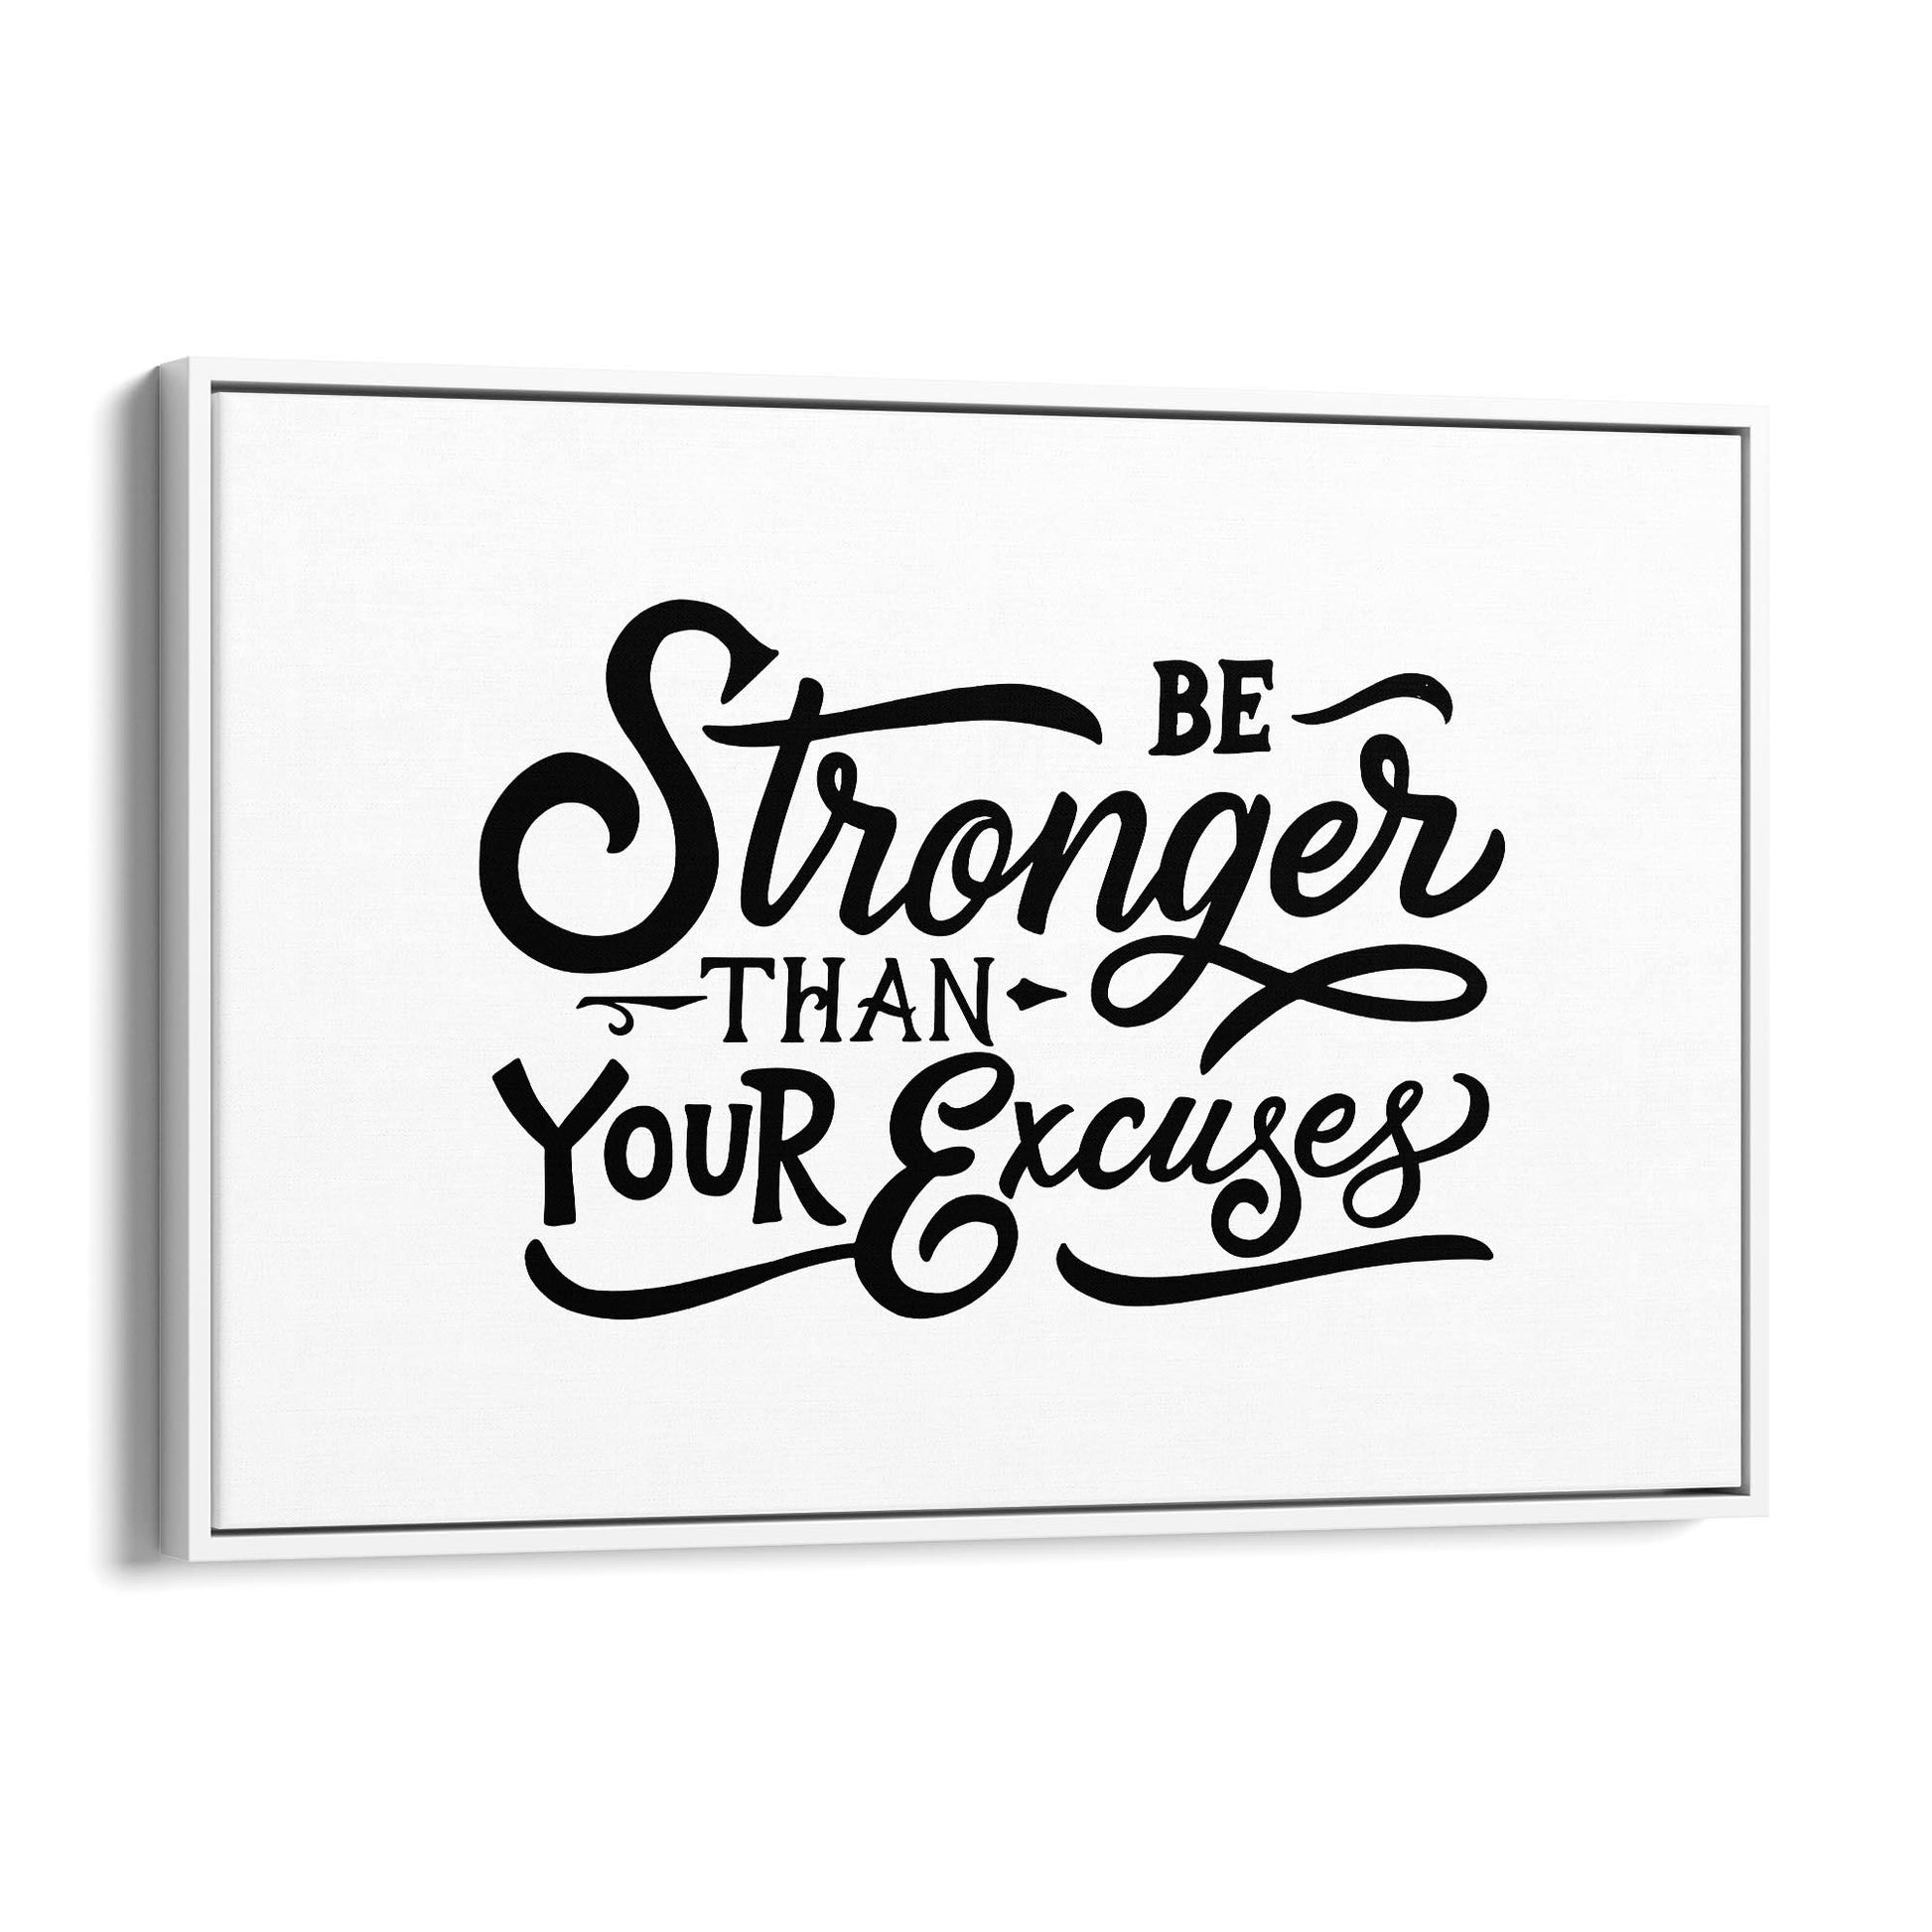 Gym Motivational Quote Fitness Wall Art #2 - The Affordable Art Company